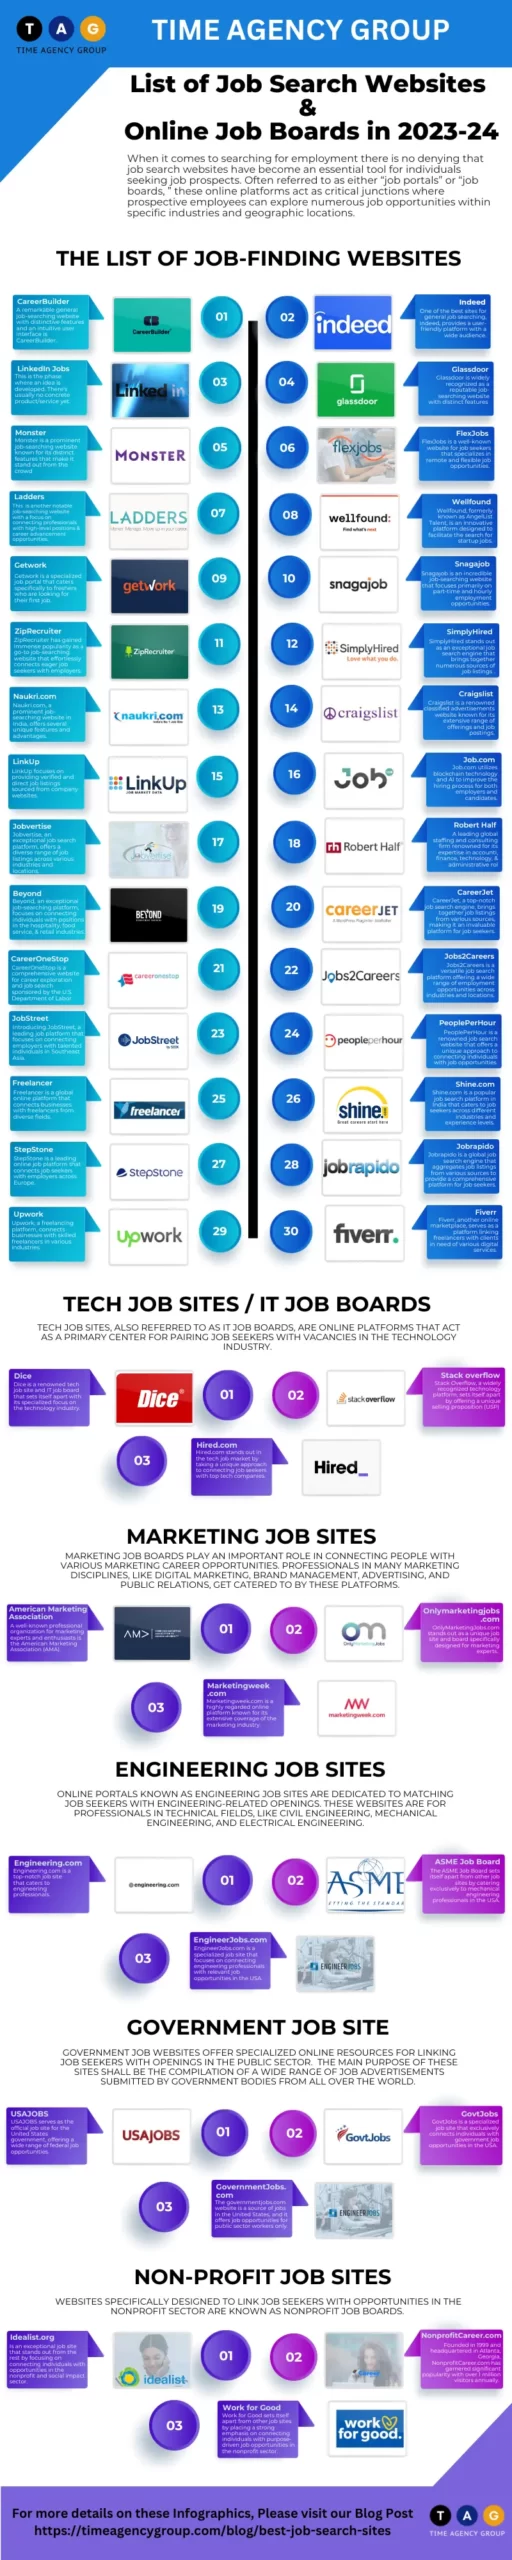 Infographics - List of Best Search Job Websites & Job Search Engines Online in 2023